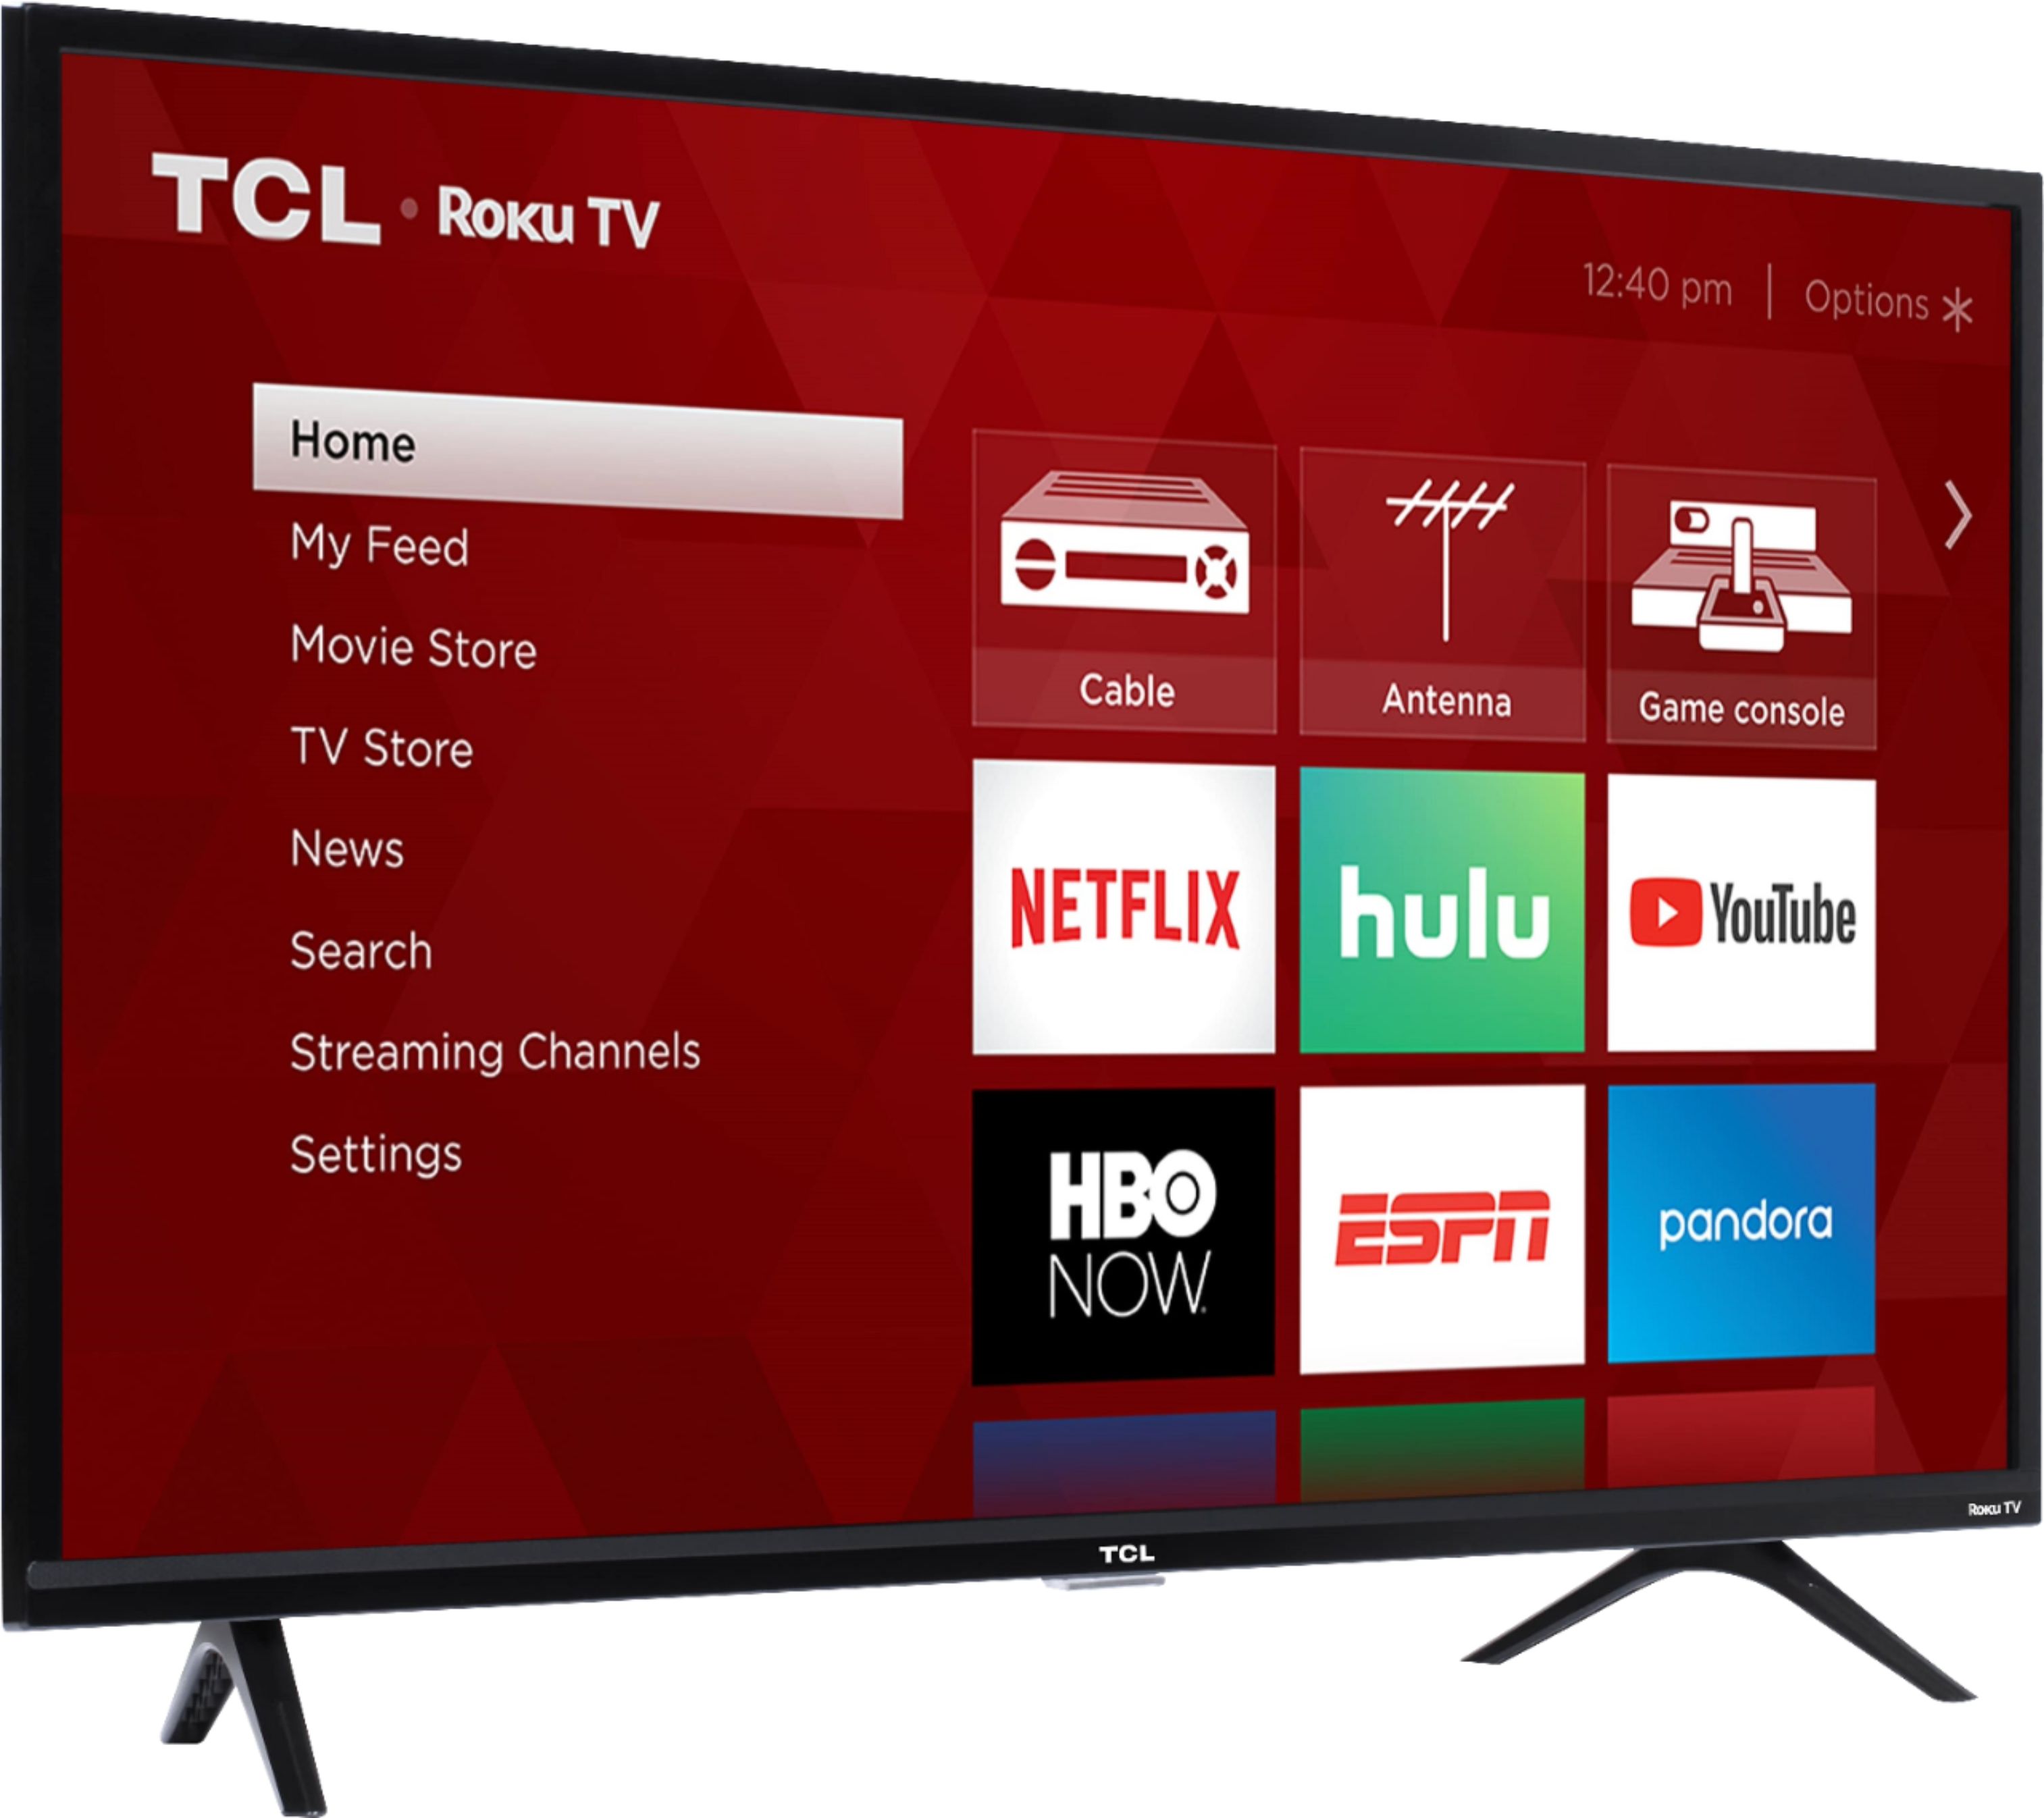 TCL 43 Class 3-Series FHD LED Smart Android TV - 43S334